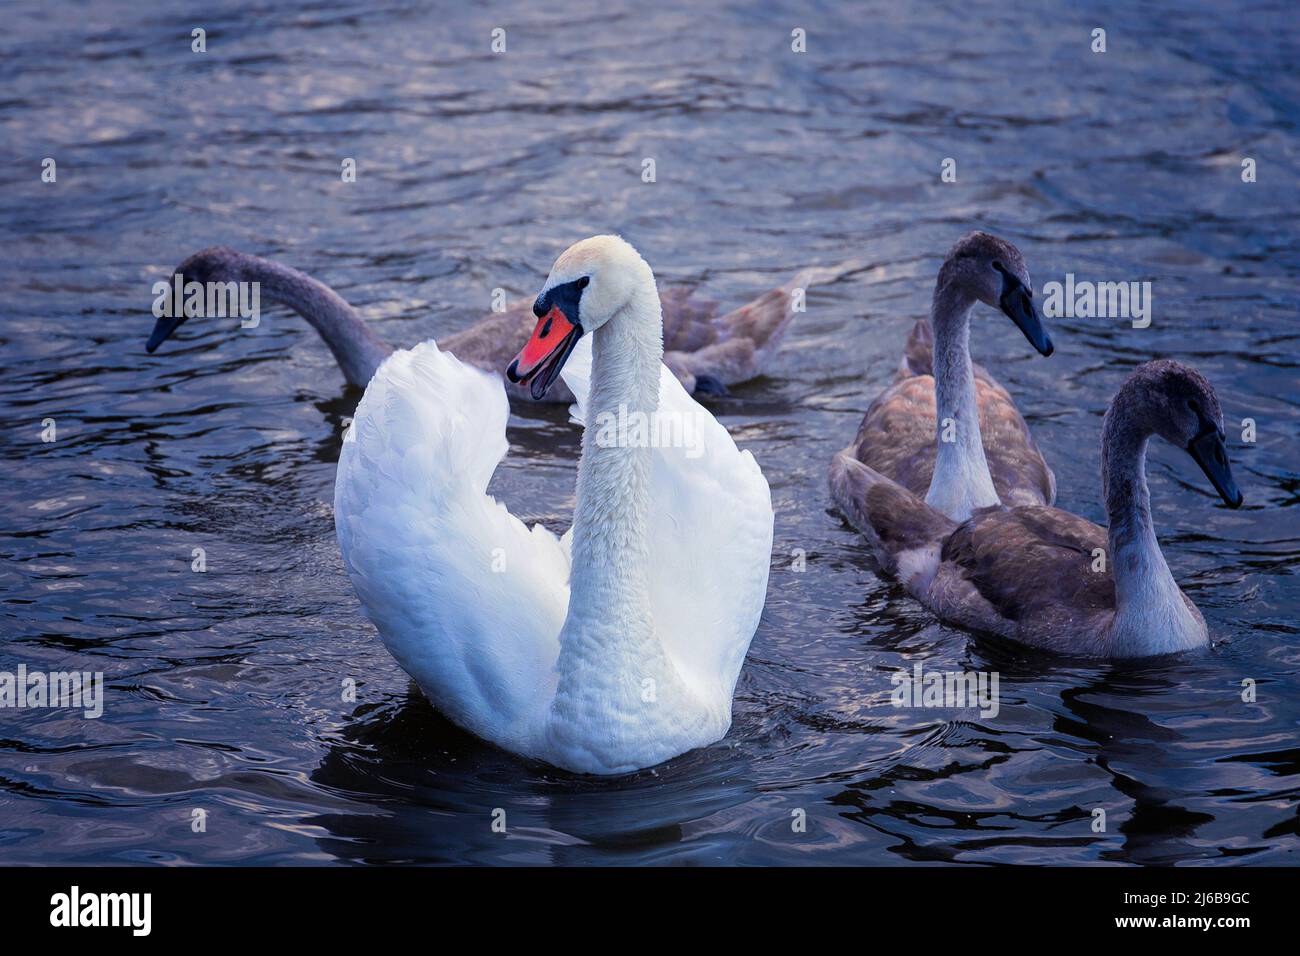 mute swan with chicks (Cygnus olor), wild birds on water surface Stock Photo